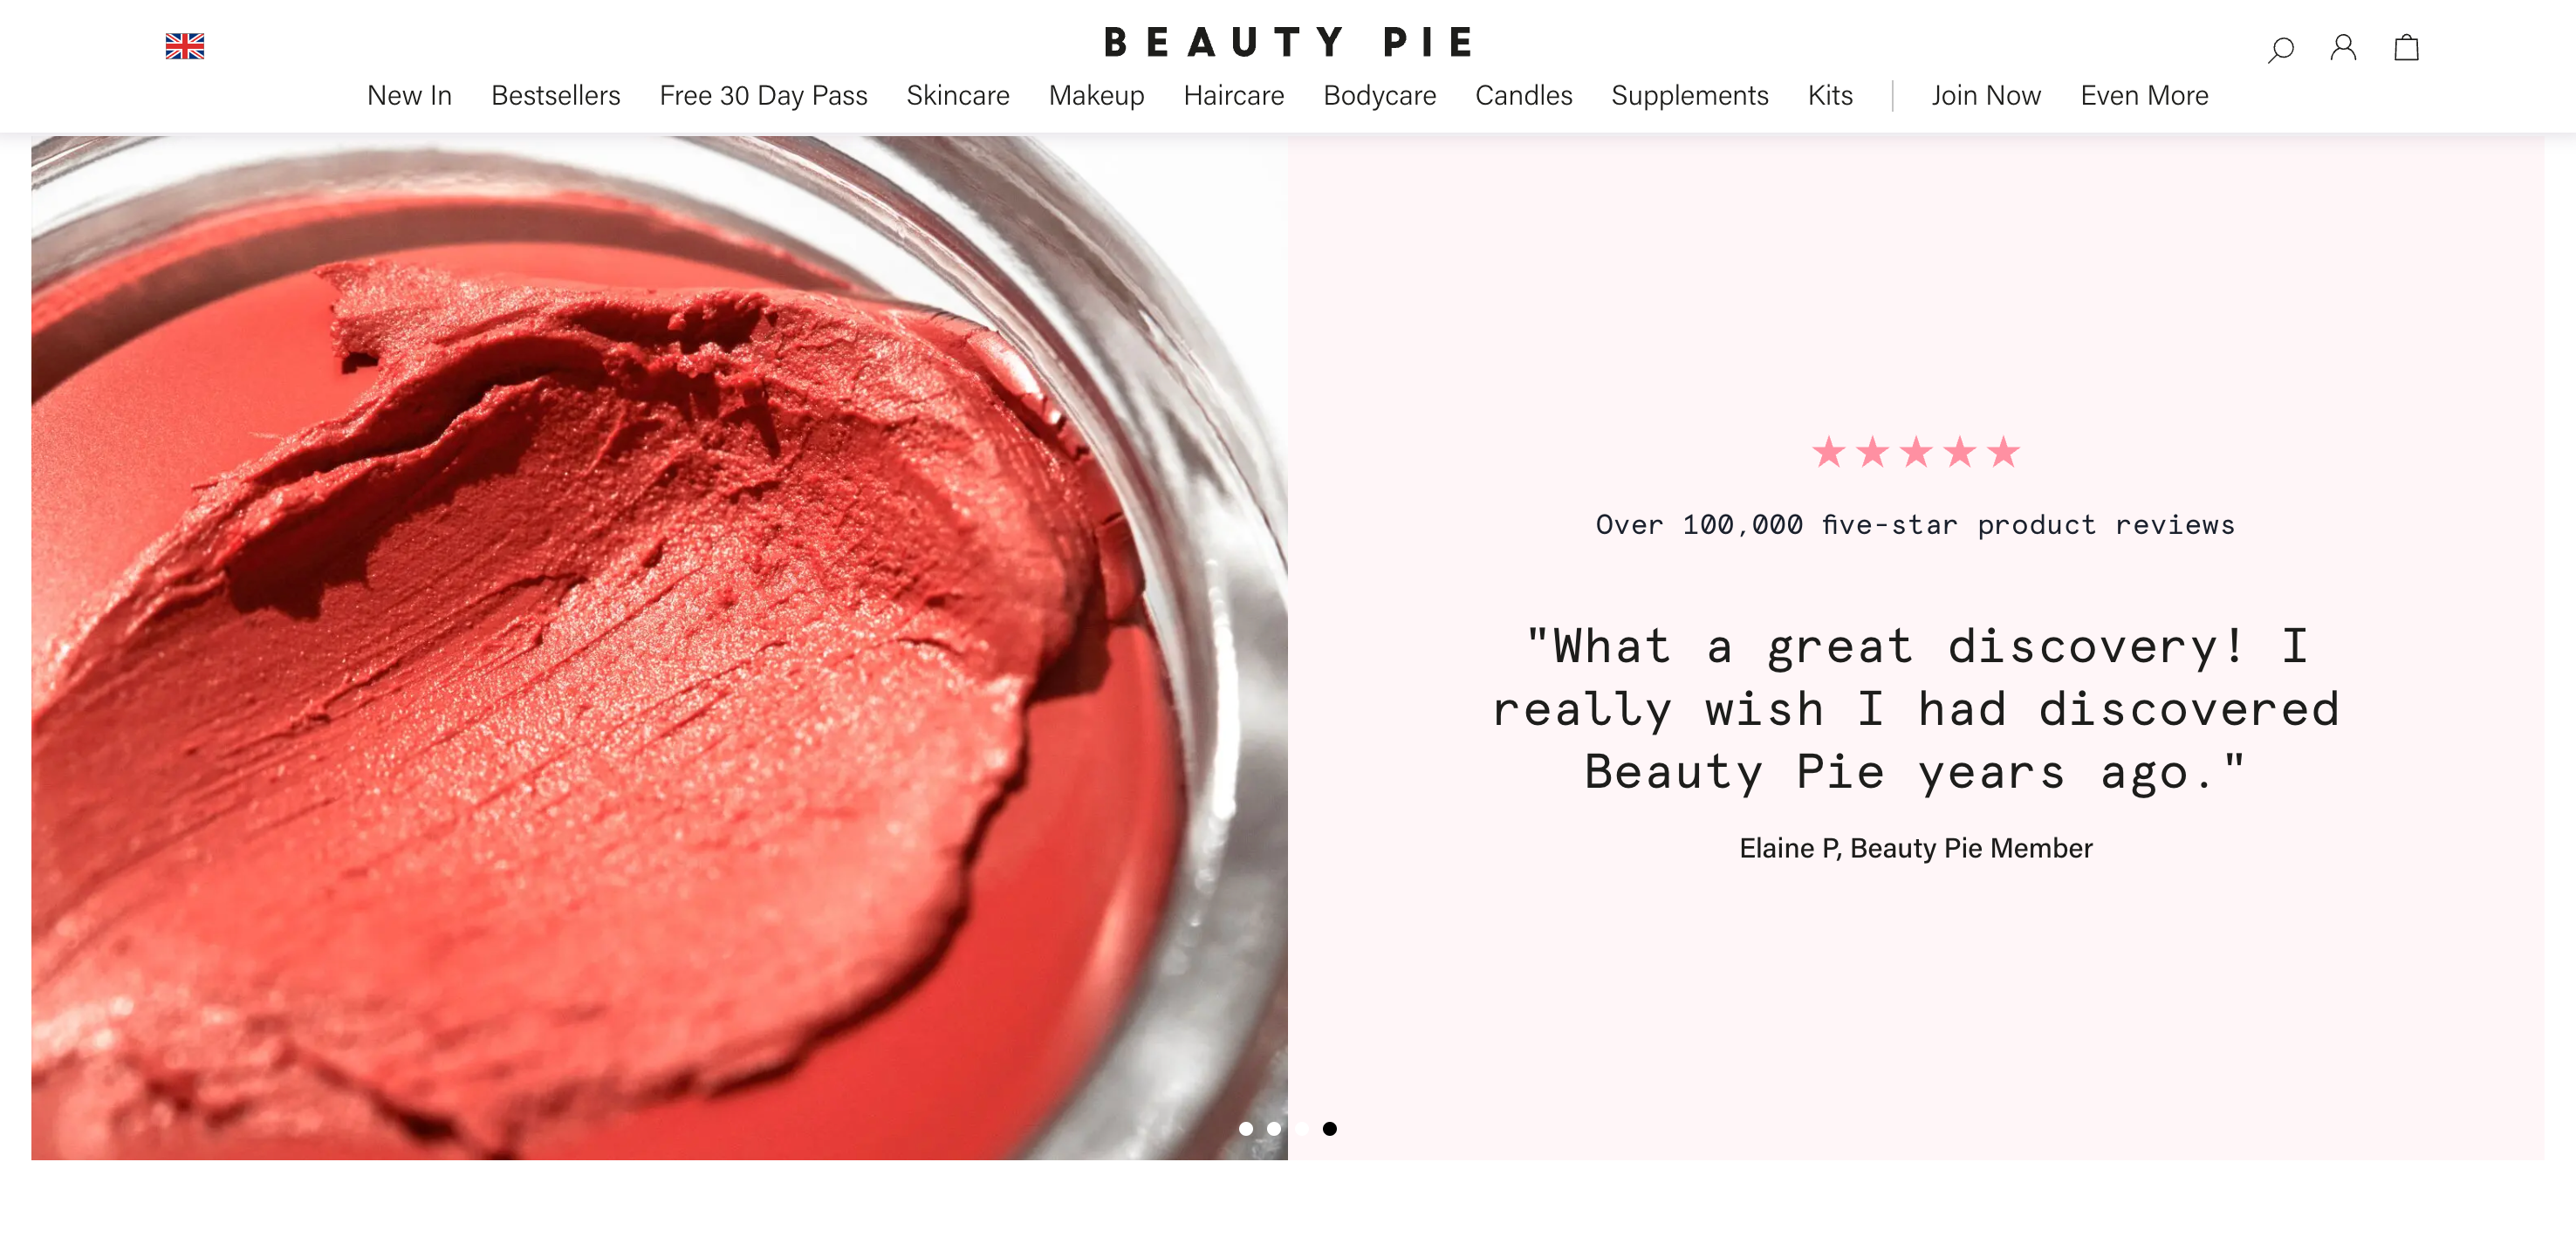 Ecommerce homepage for the brand Beauty Pie